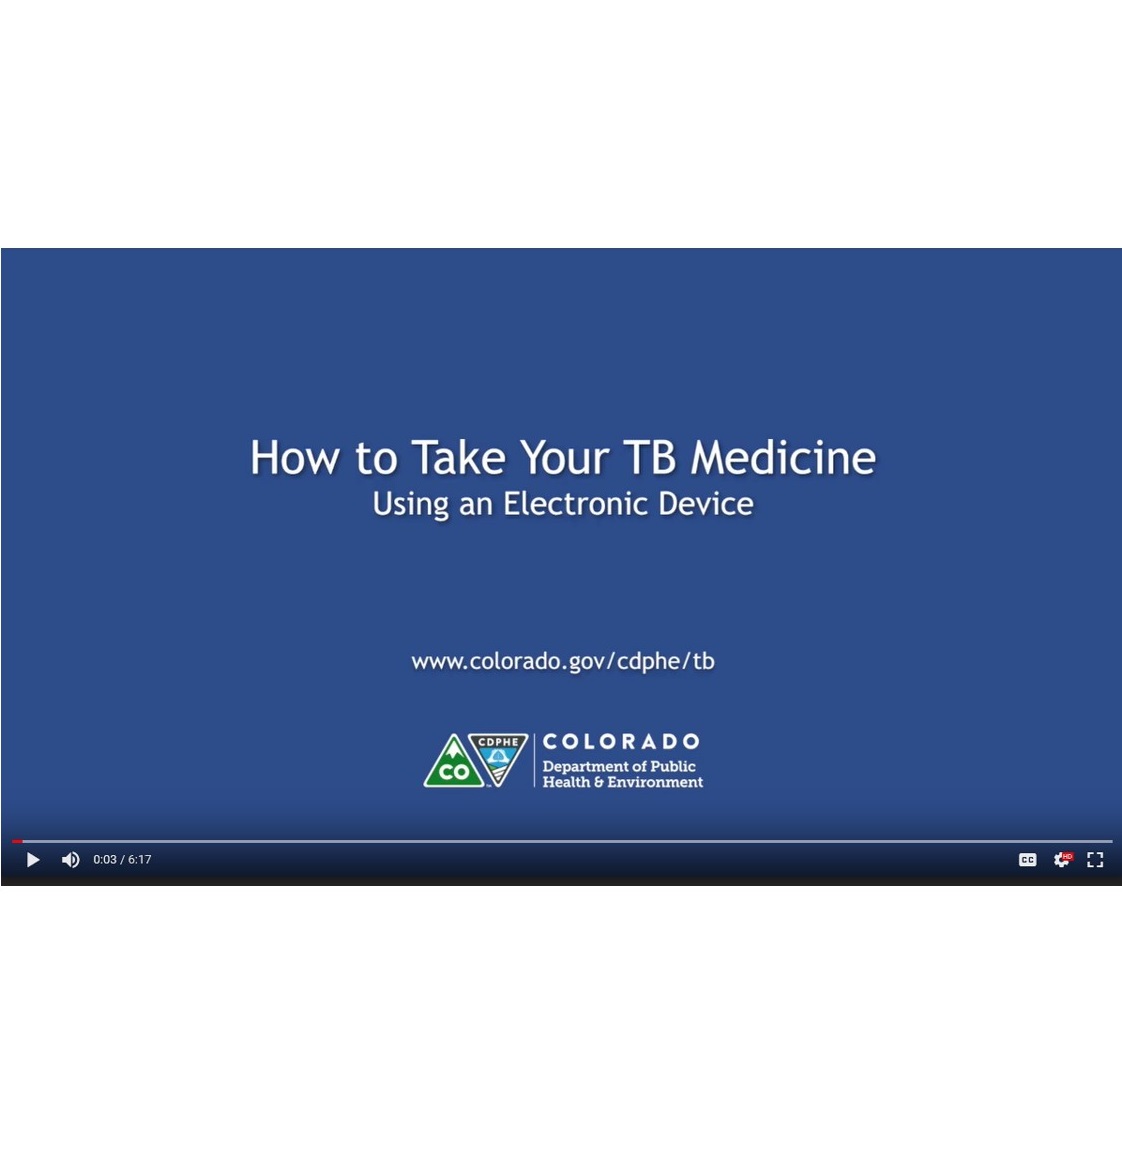 How to Take Your TB Medicine Using an Electronic Device